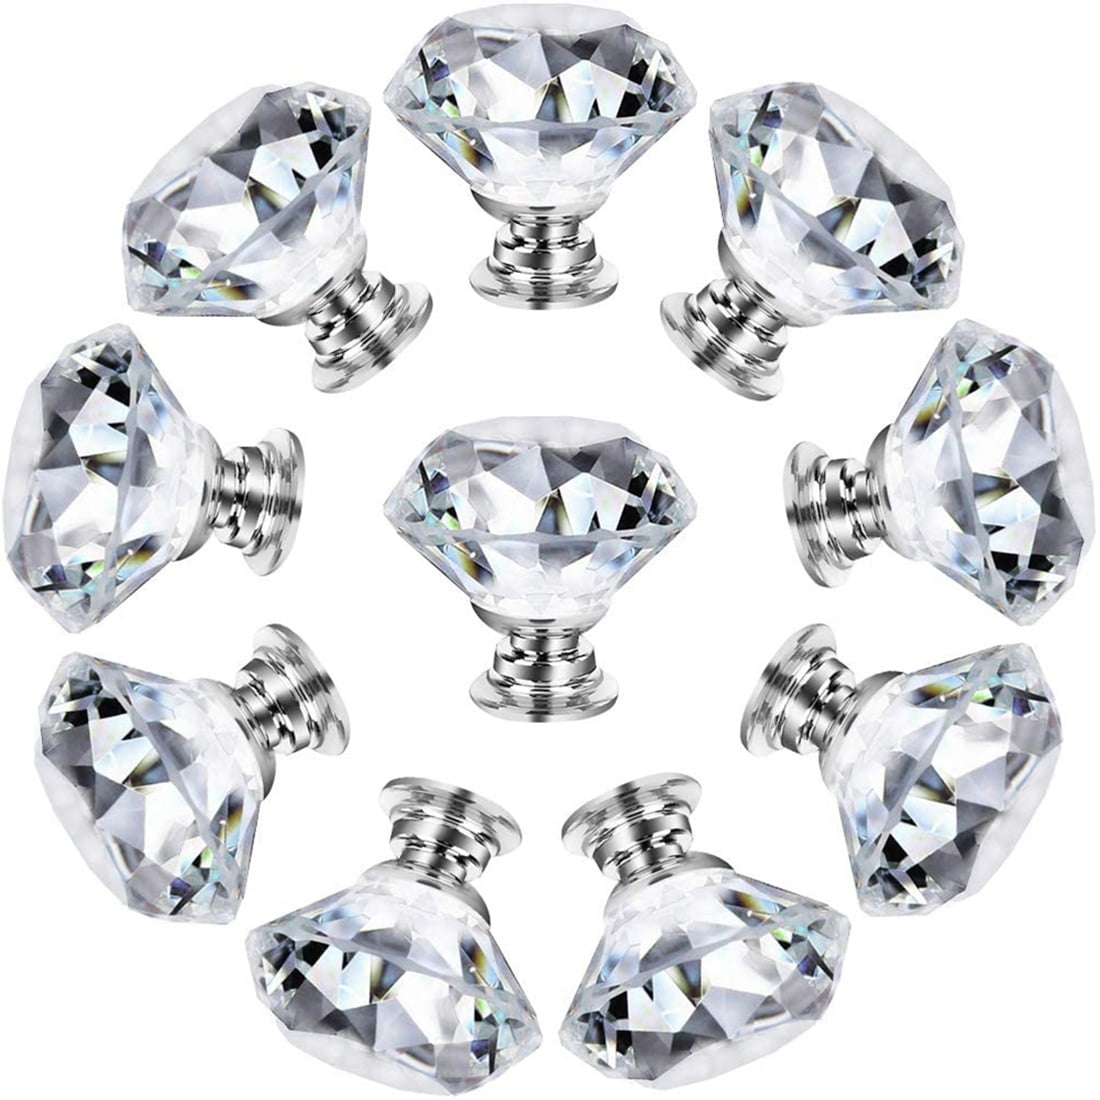 Wynmarts 12 pcs Clear Crystal Glass Drawer Cabinet Pulls Knobs 